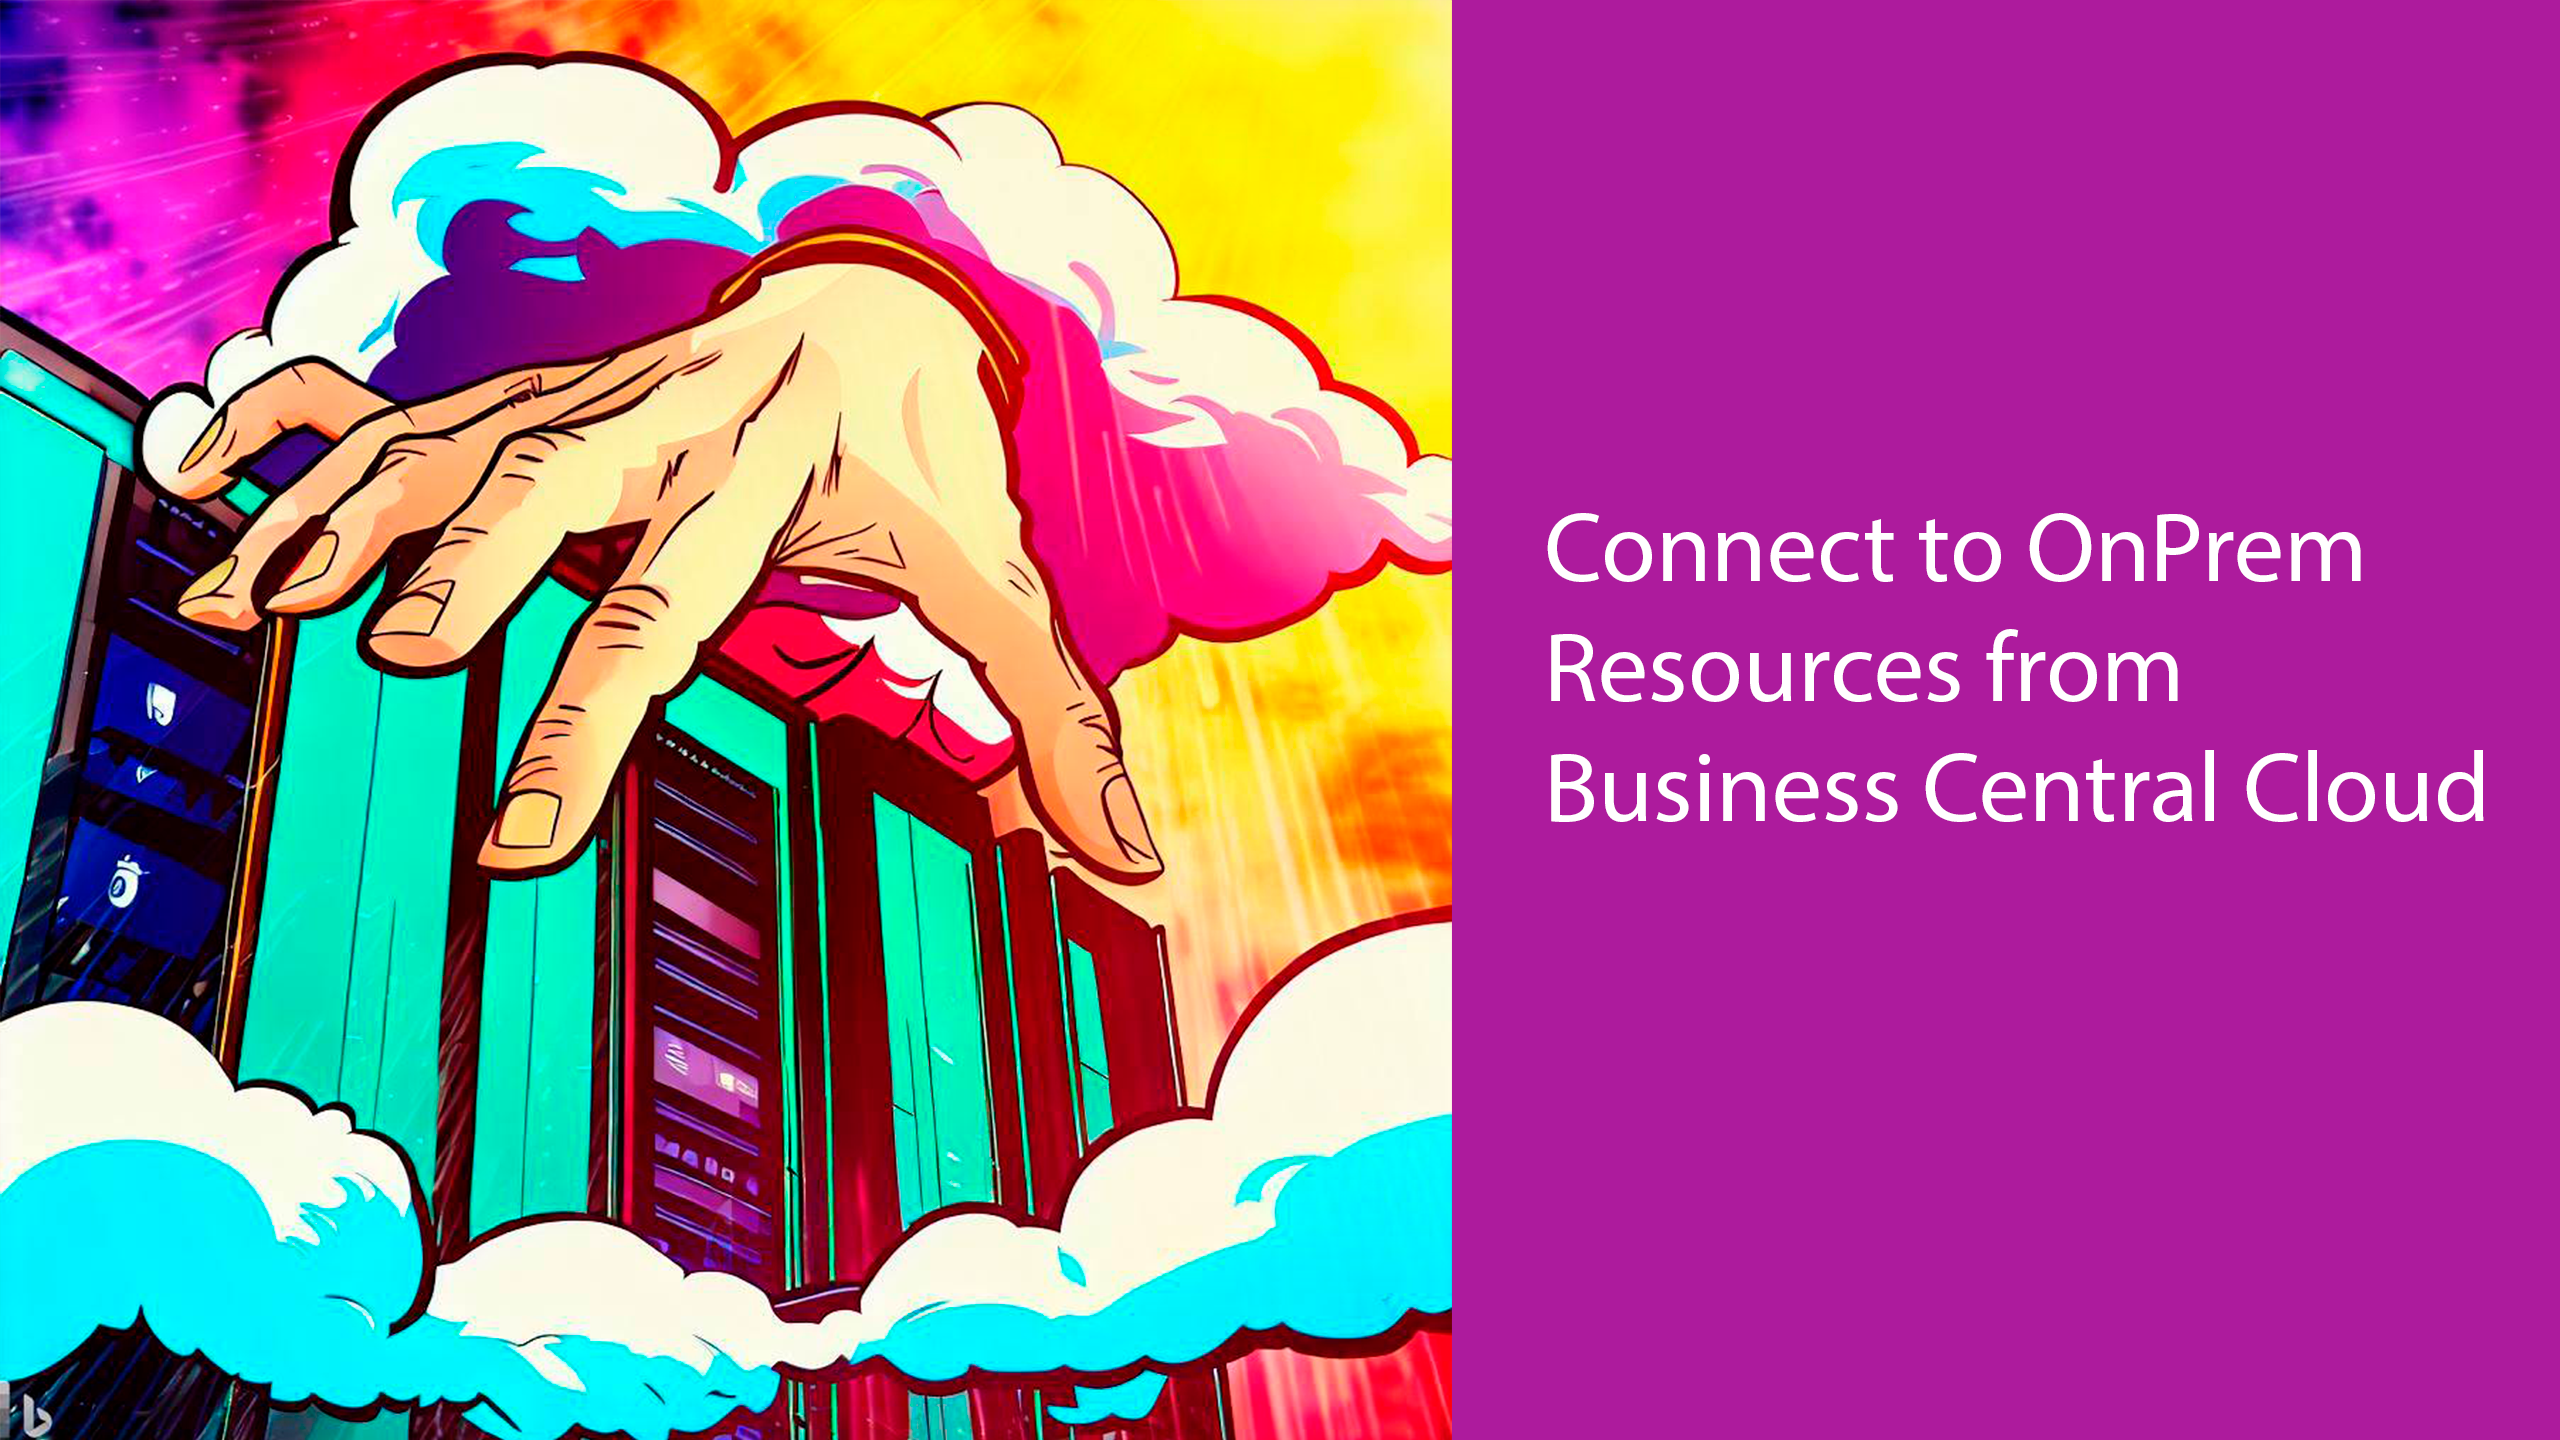 Connect to OnPrem Resources from Business Central Cloud